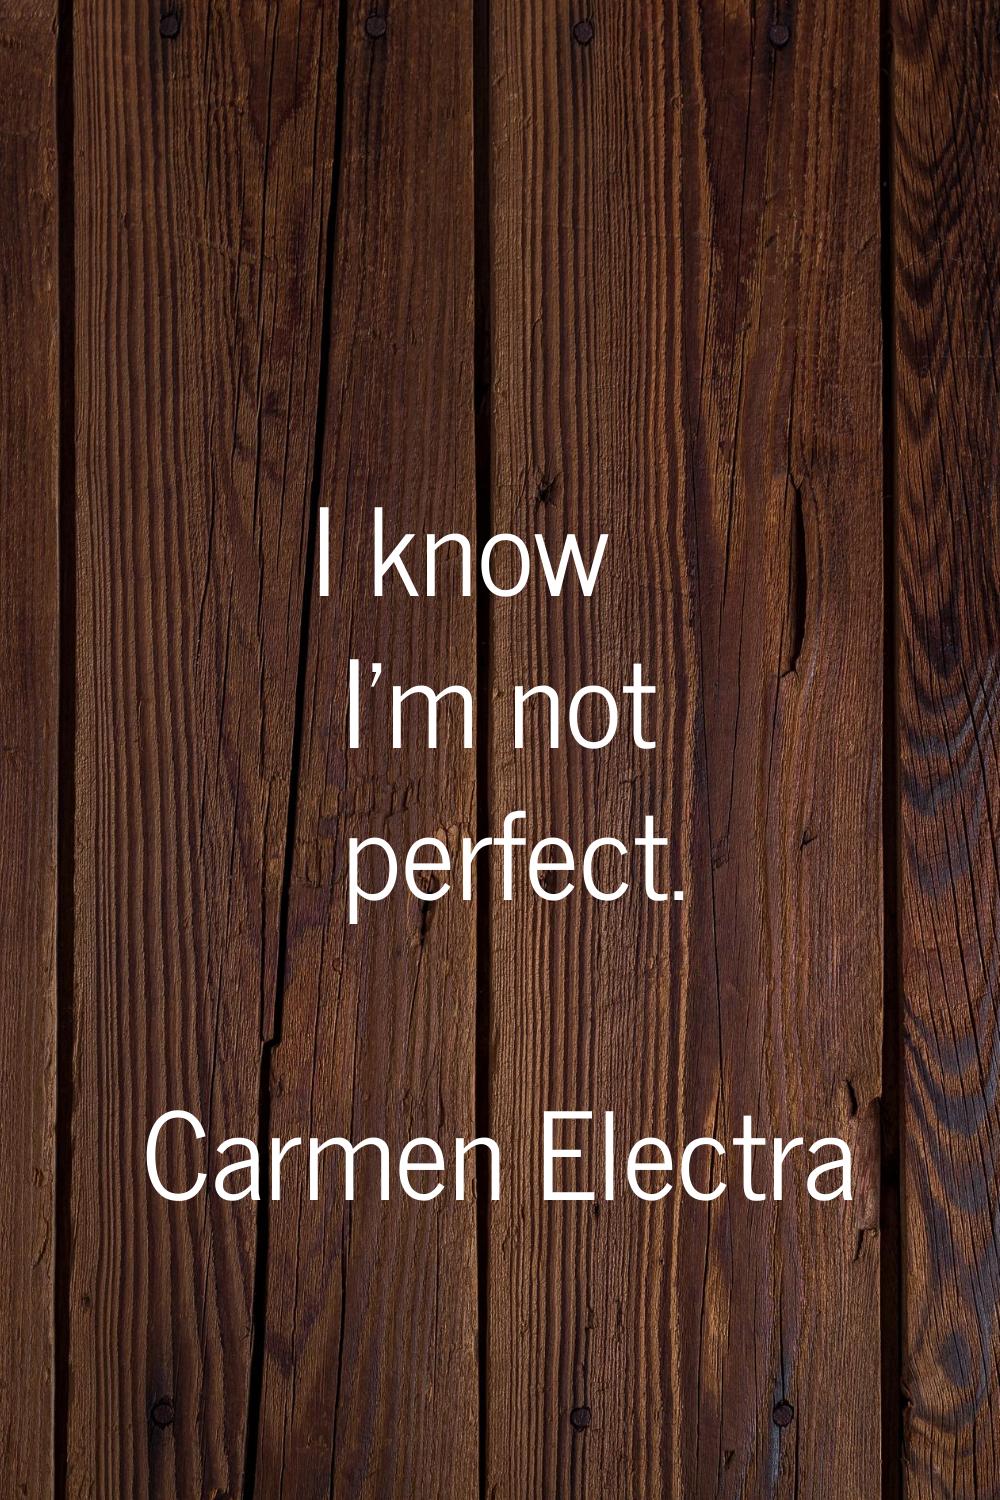 I know I'm not perfect.